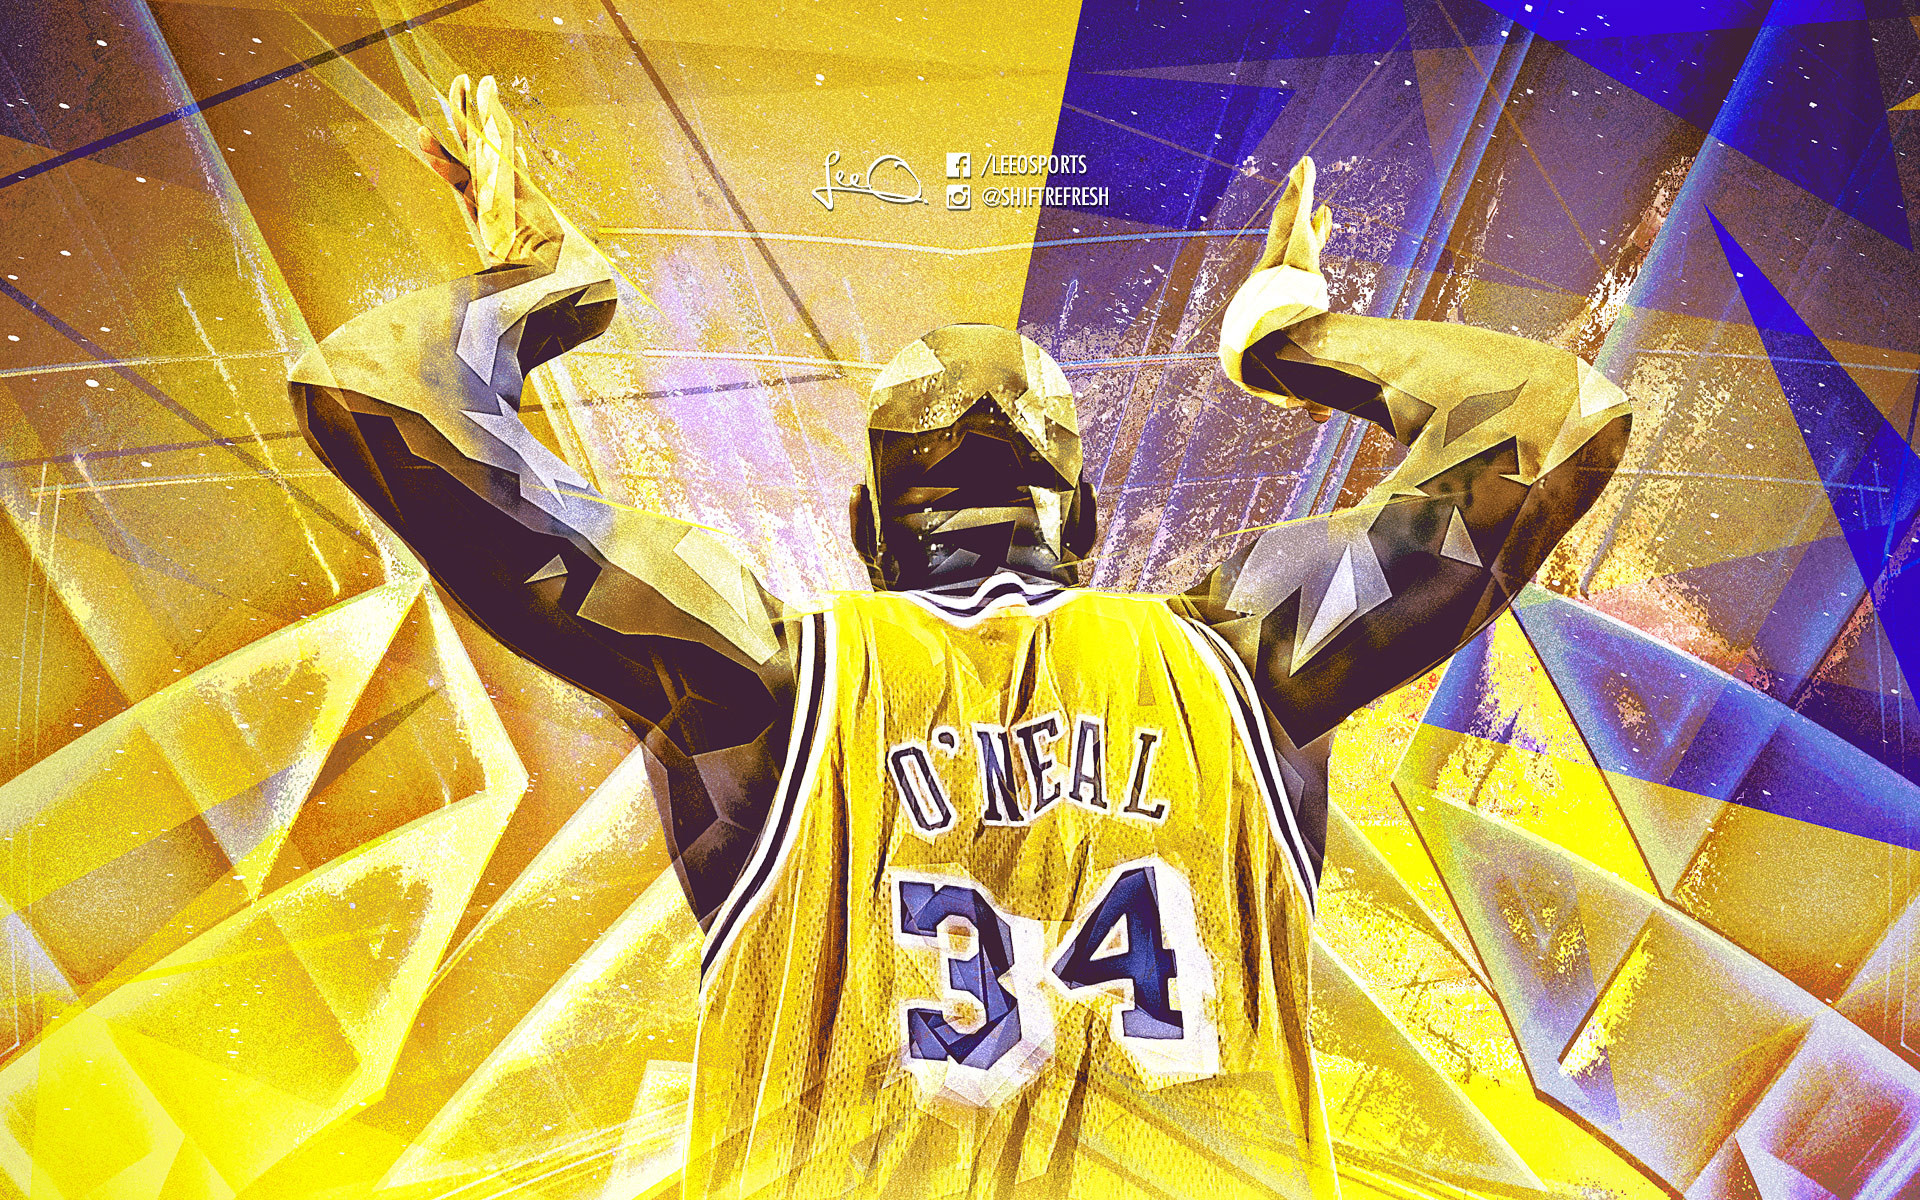 HD wallpaper NBA basketball Kobe Bryant Shaquille ONeal group of  people  Wallpaper Flare